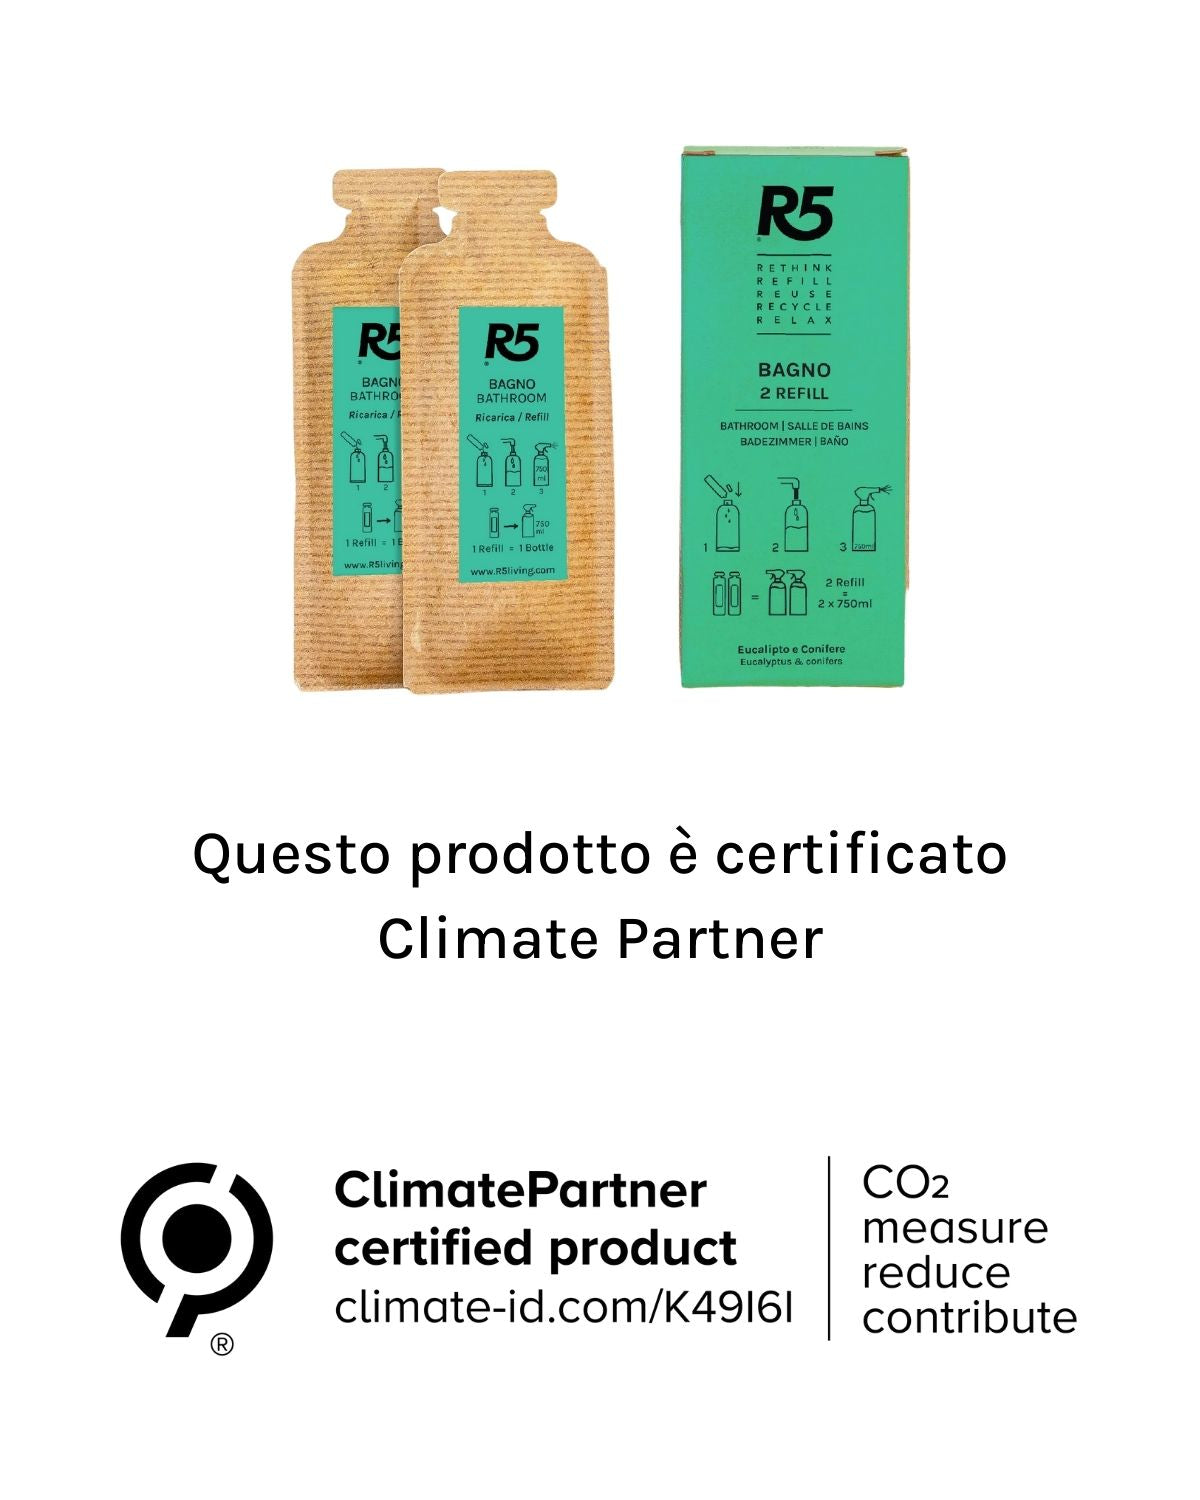 Climate Partner certified refill bagno